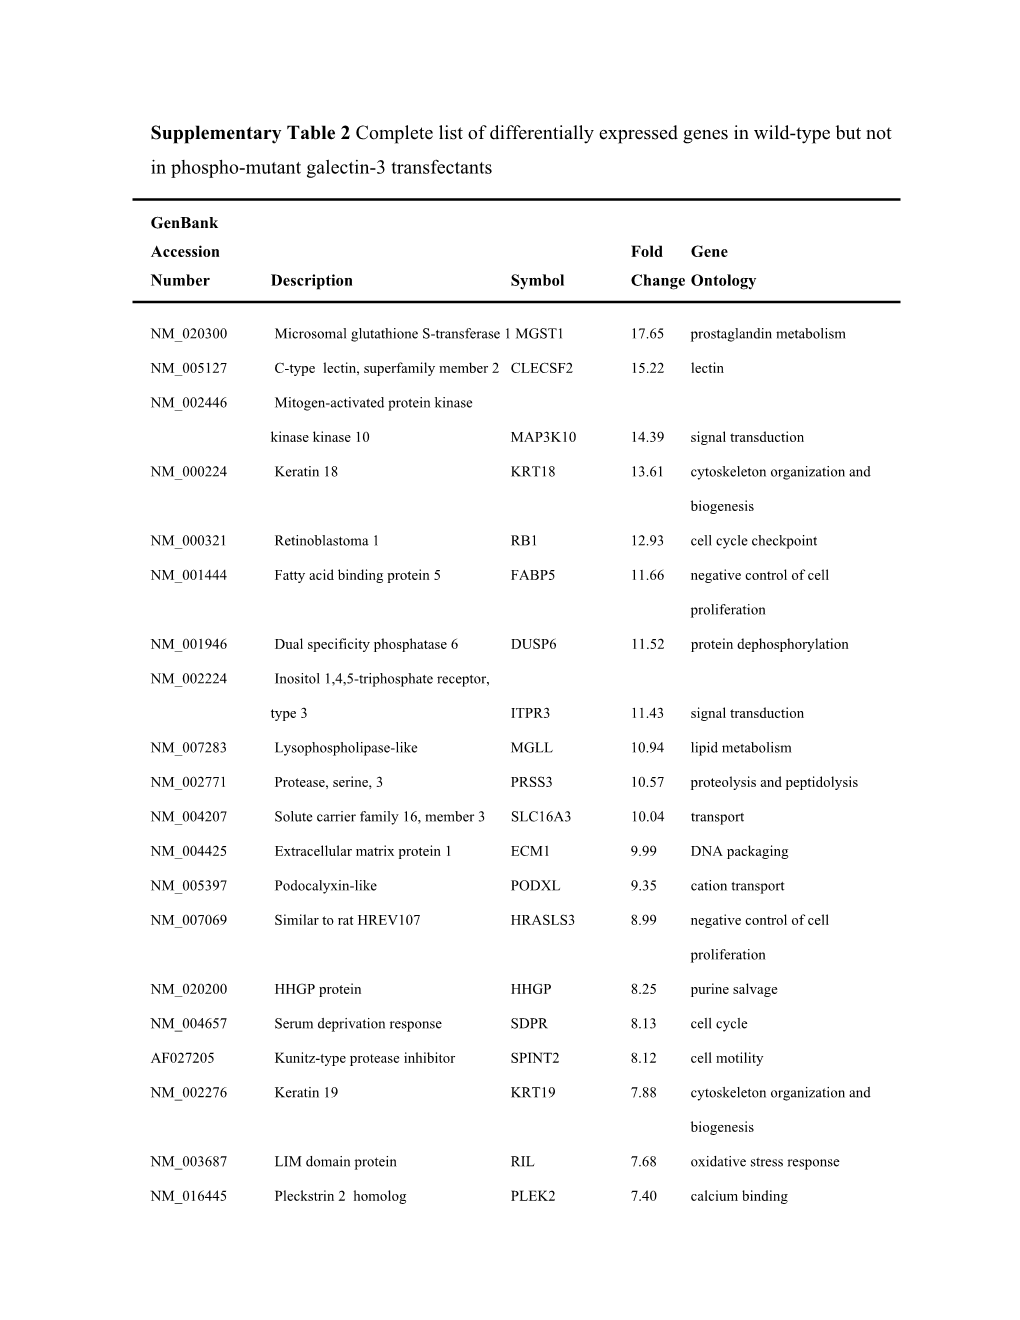 Supplementary Table 2 Complete List of Differentially Expressed Genes in Wild-Type but Not in Phospho-Mutant Galectin-3 Transfectants